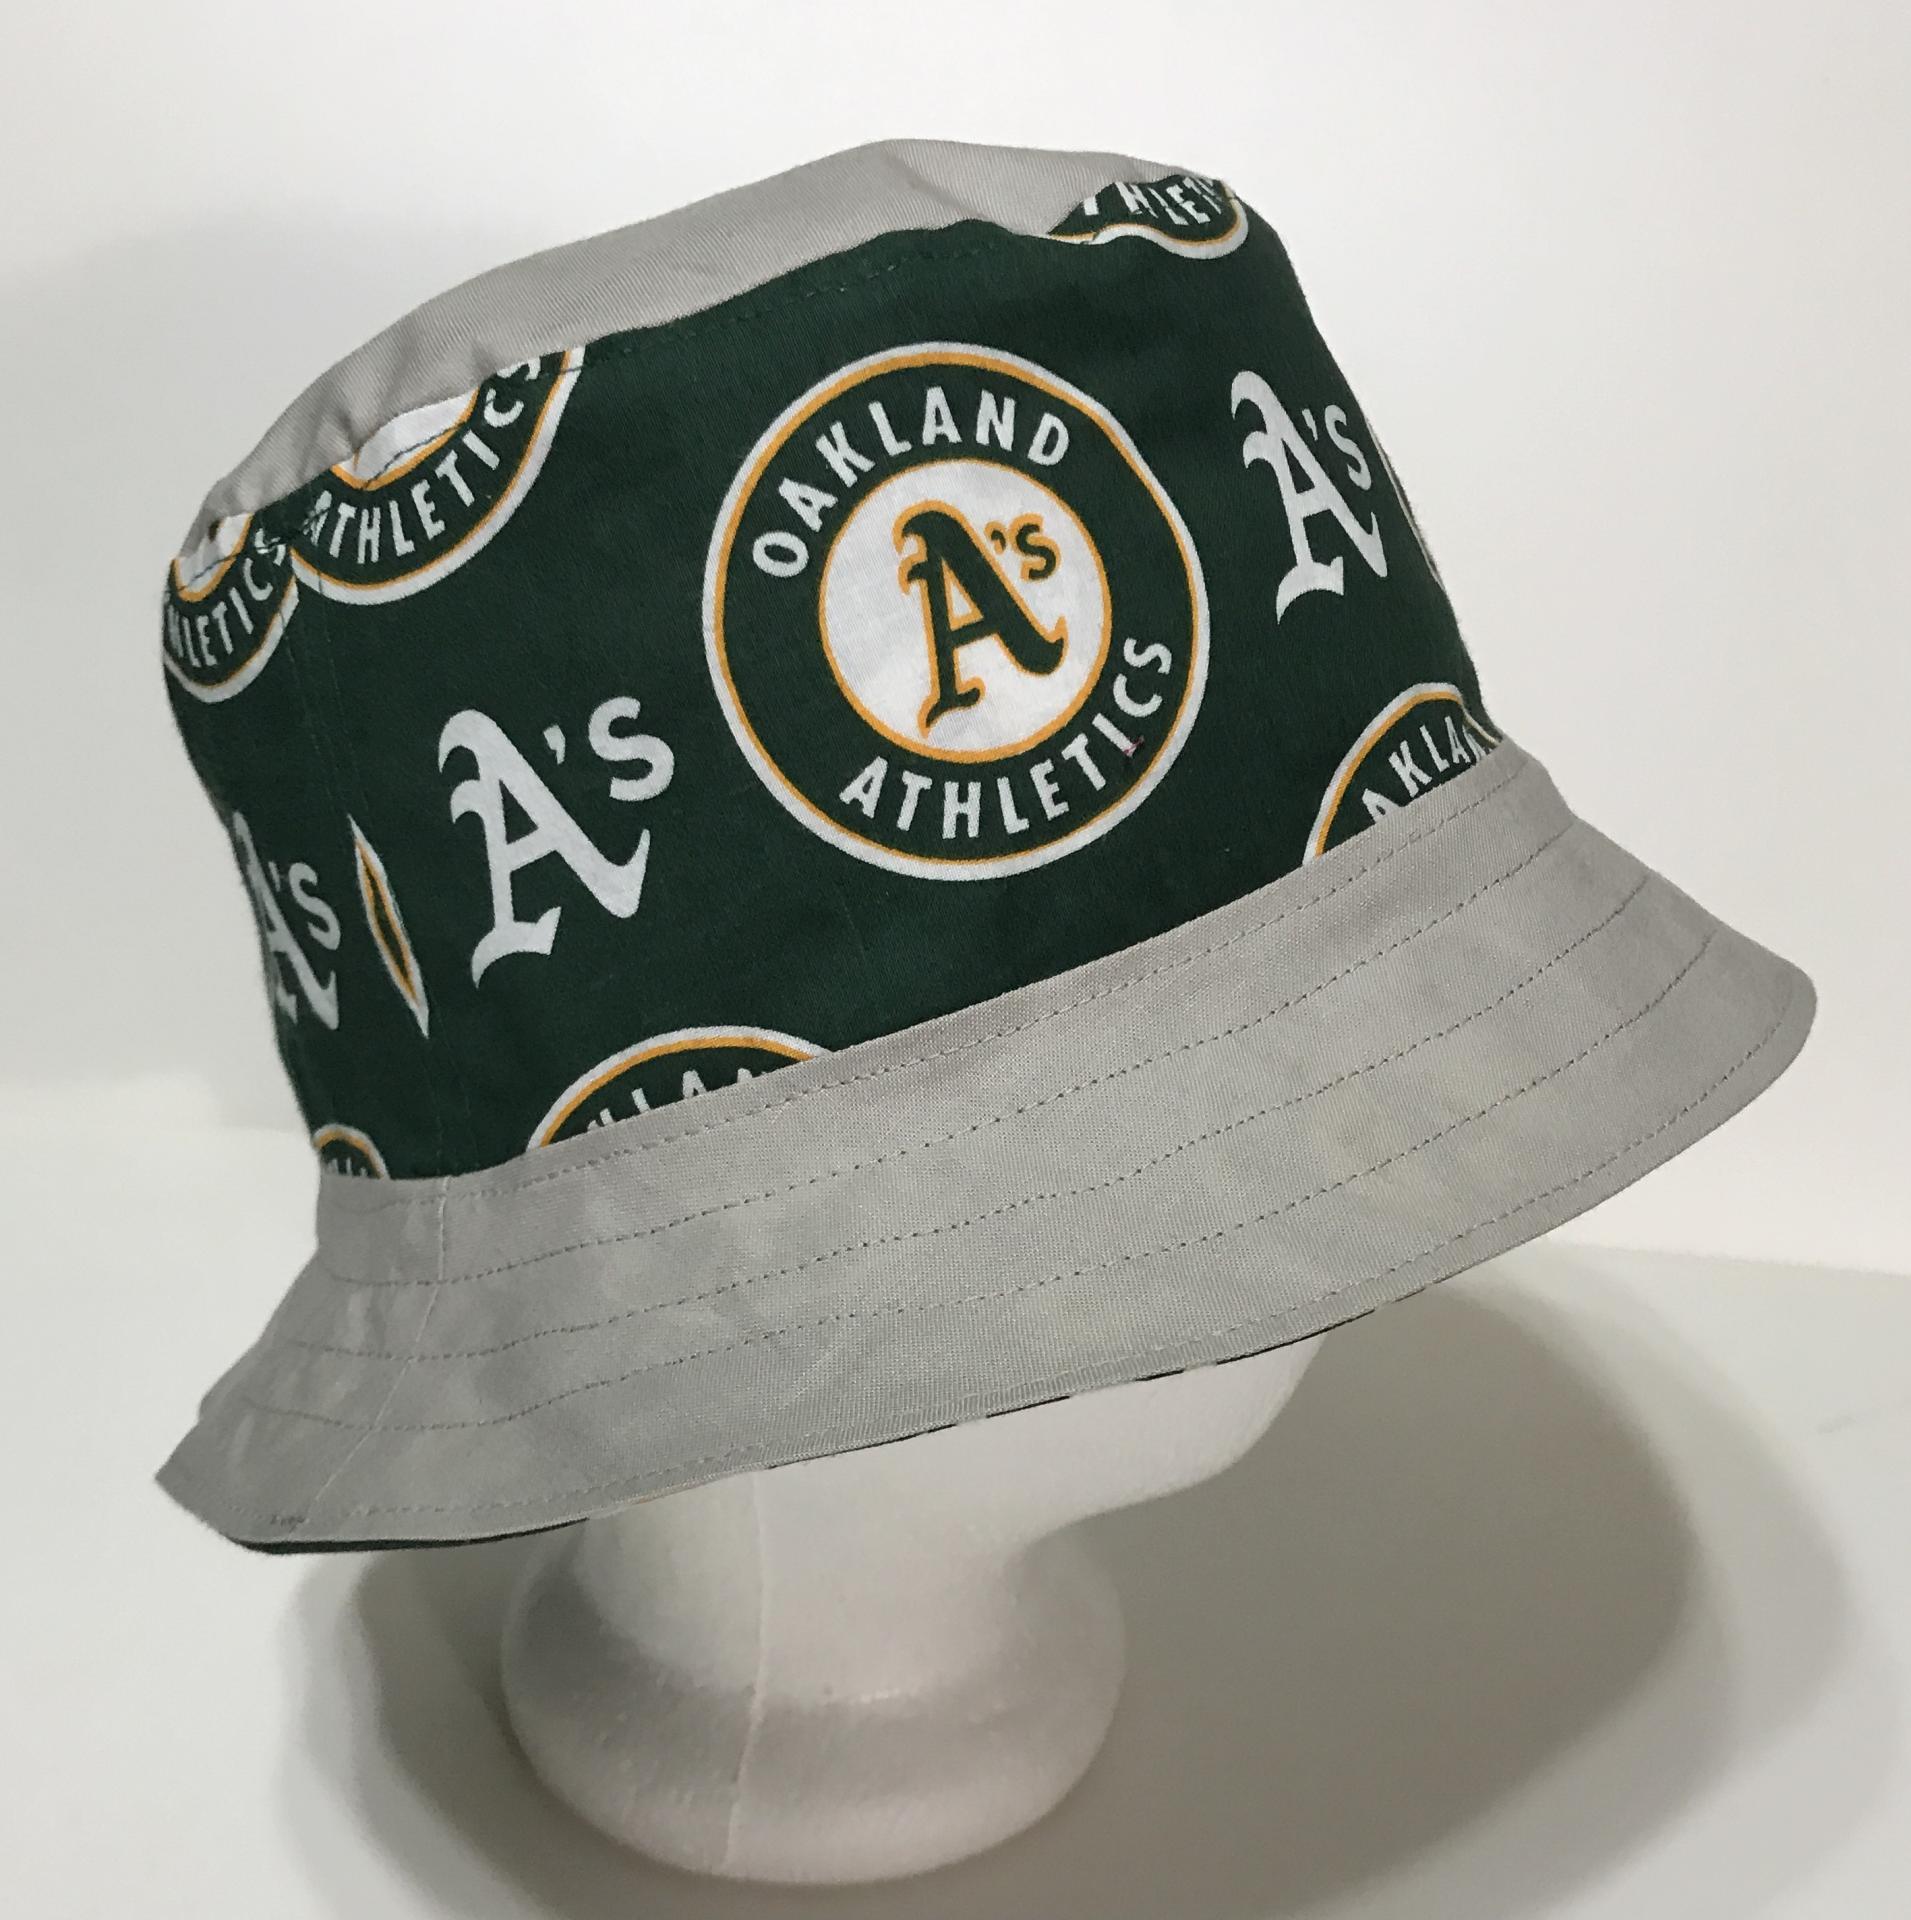 Reversible Oakland A’s Bucket Hat, Home & Away Road Gray Hat, Unisex Adult Sizes S-XXL, cotton, handmade